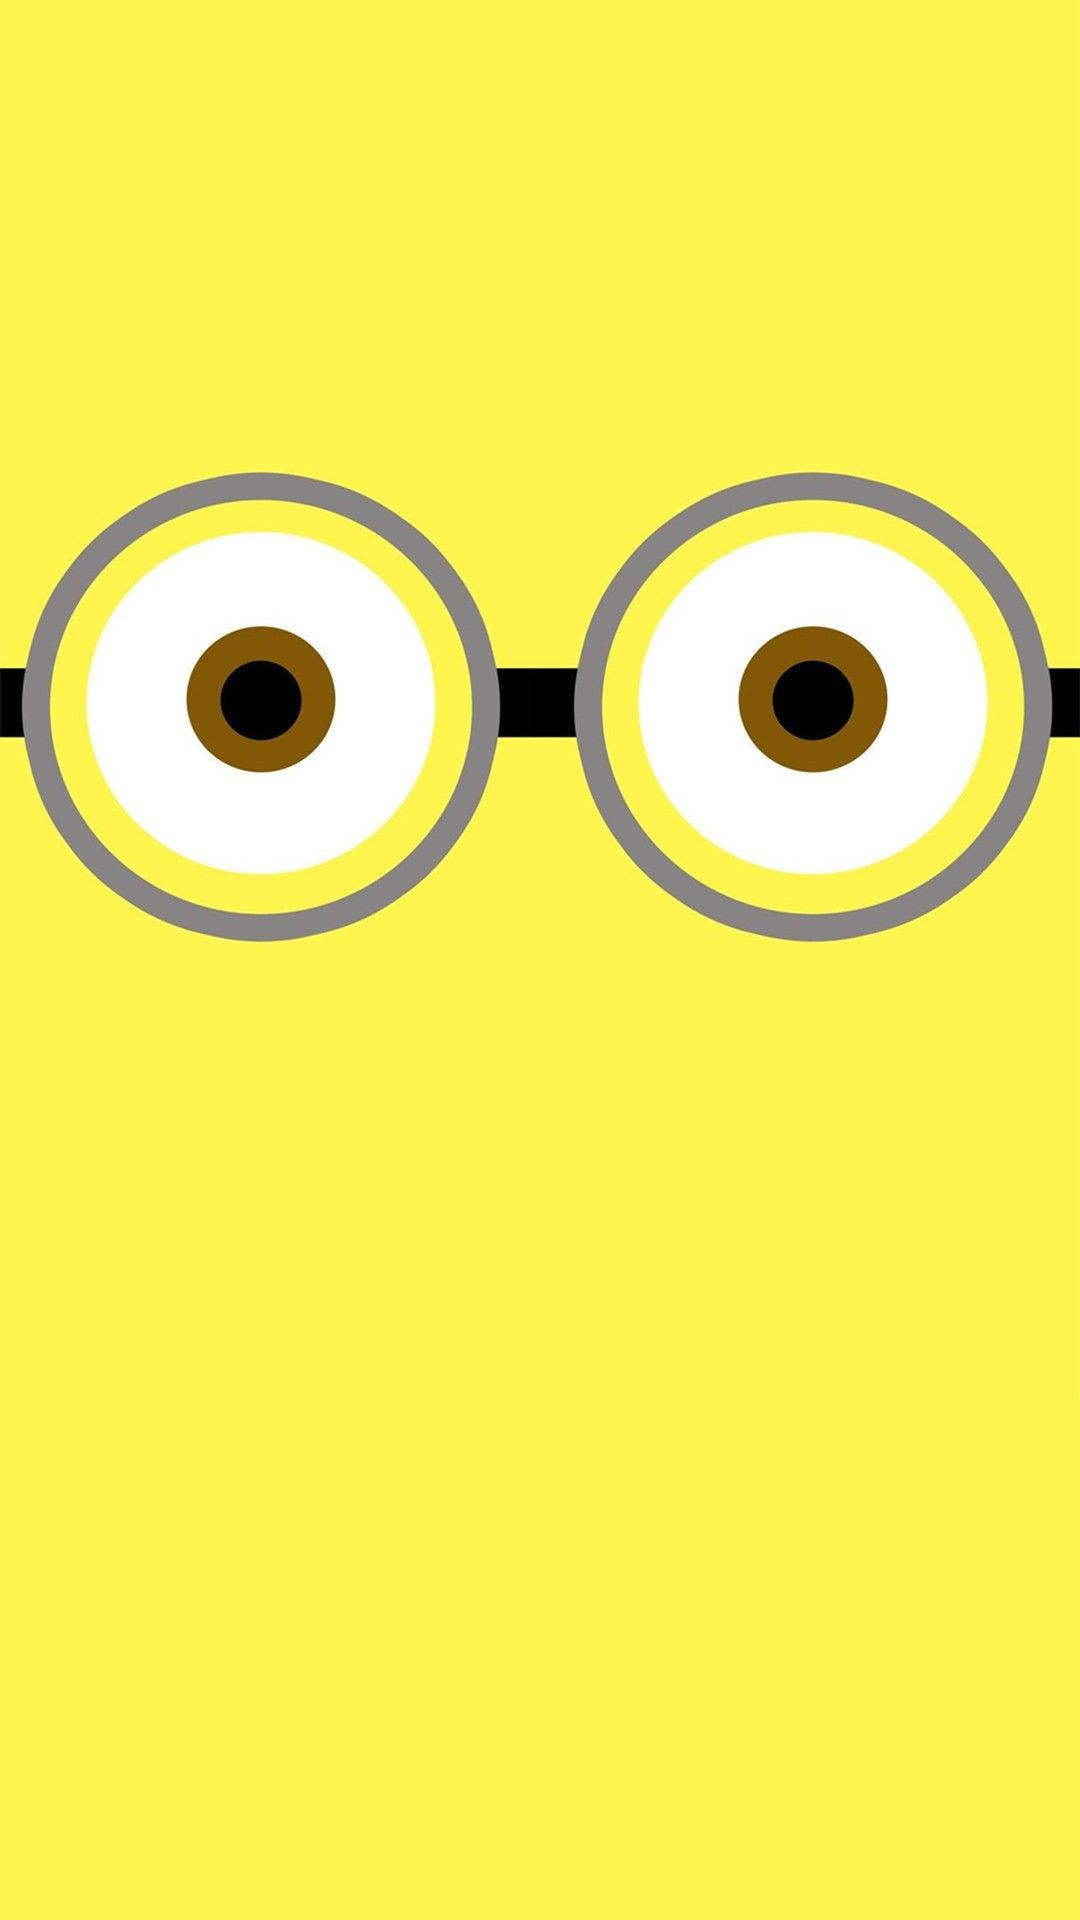 Playful Minion Eyes On A Cute Yellow Background